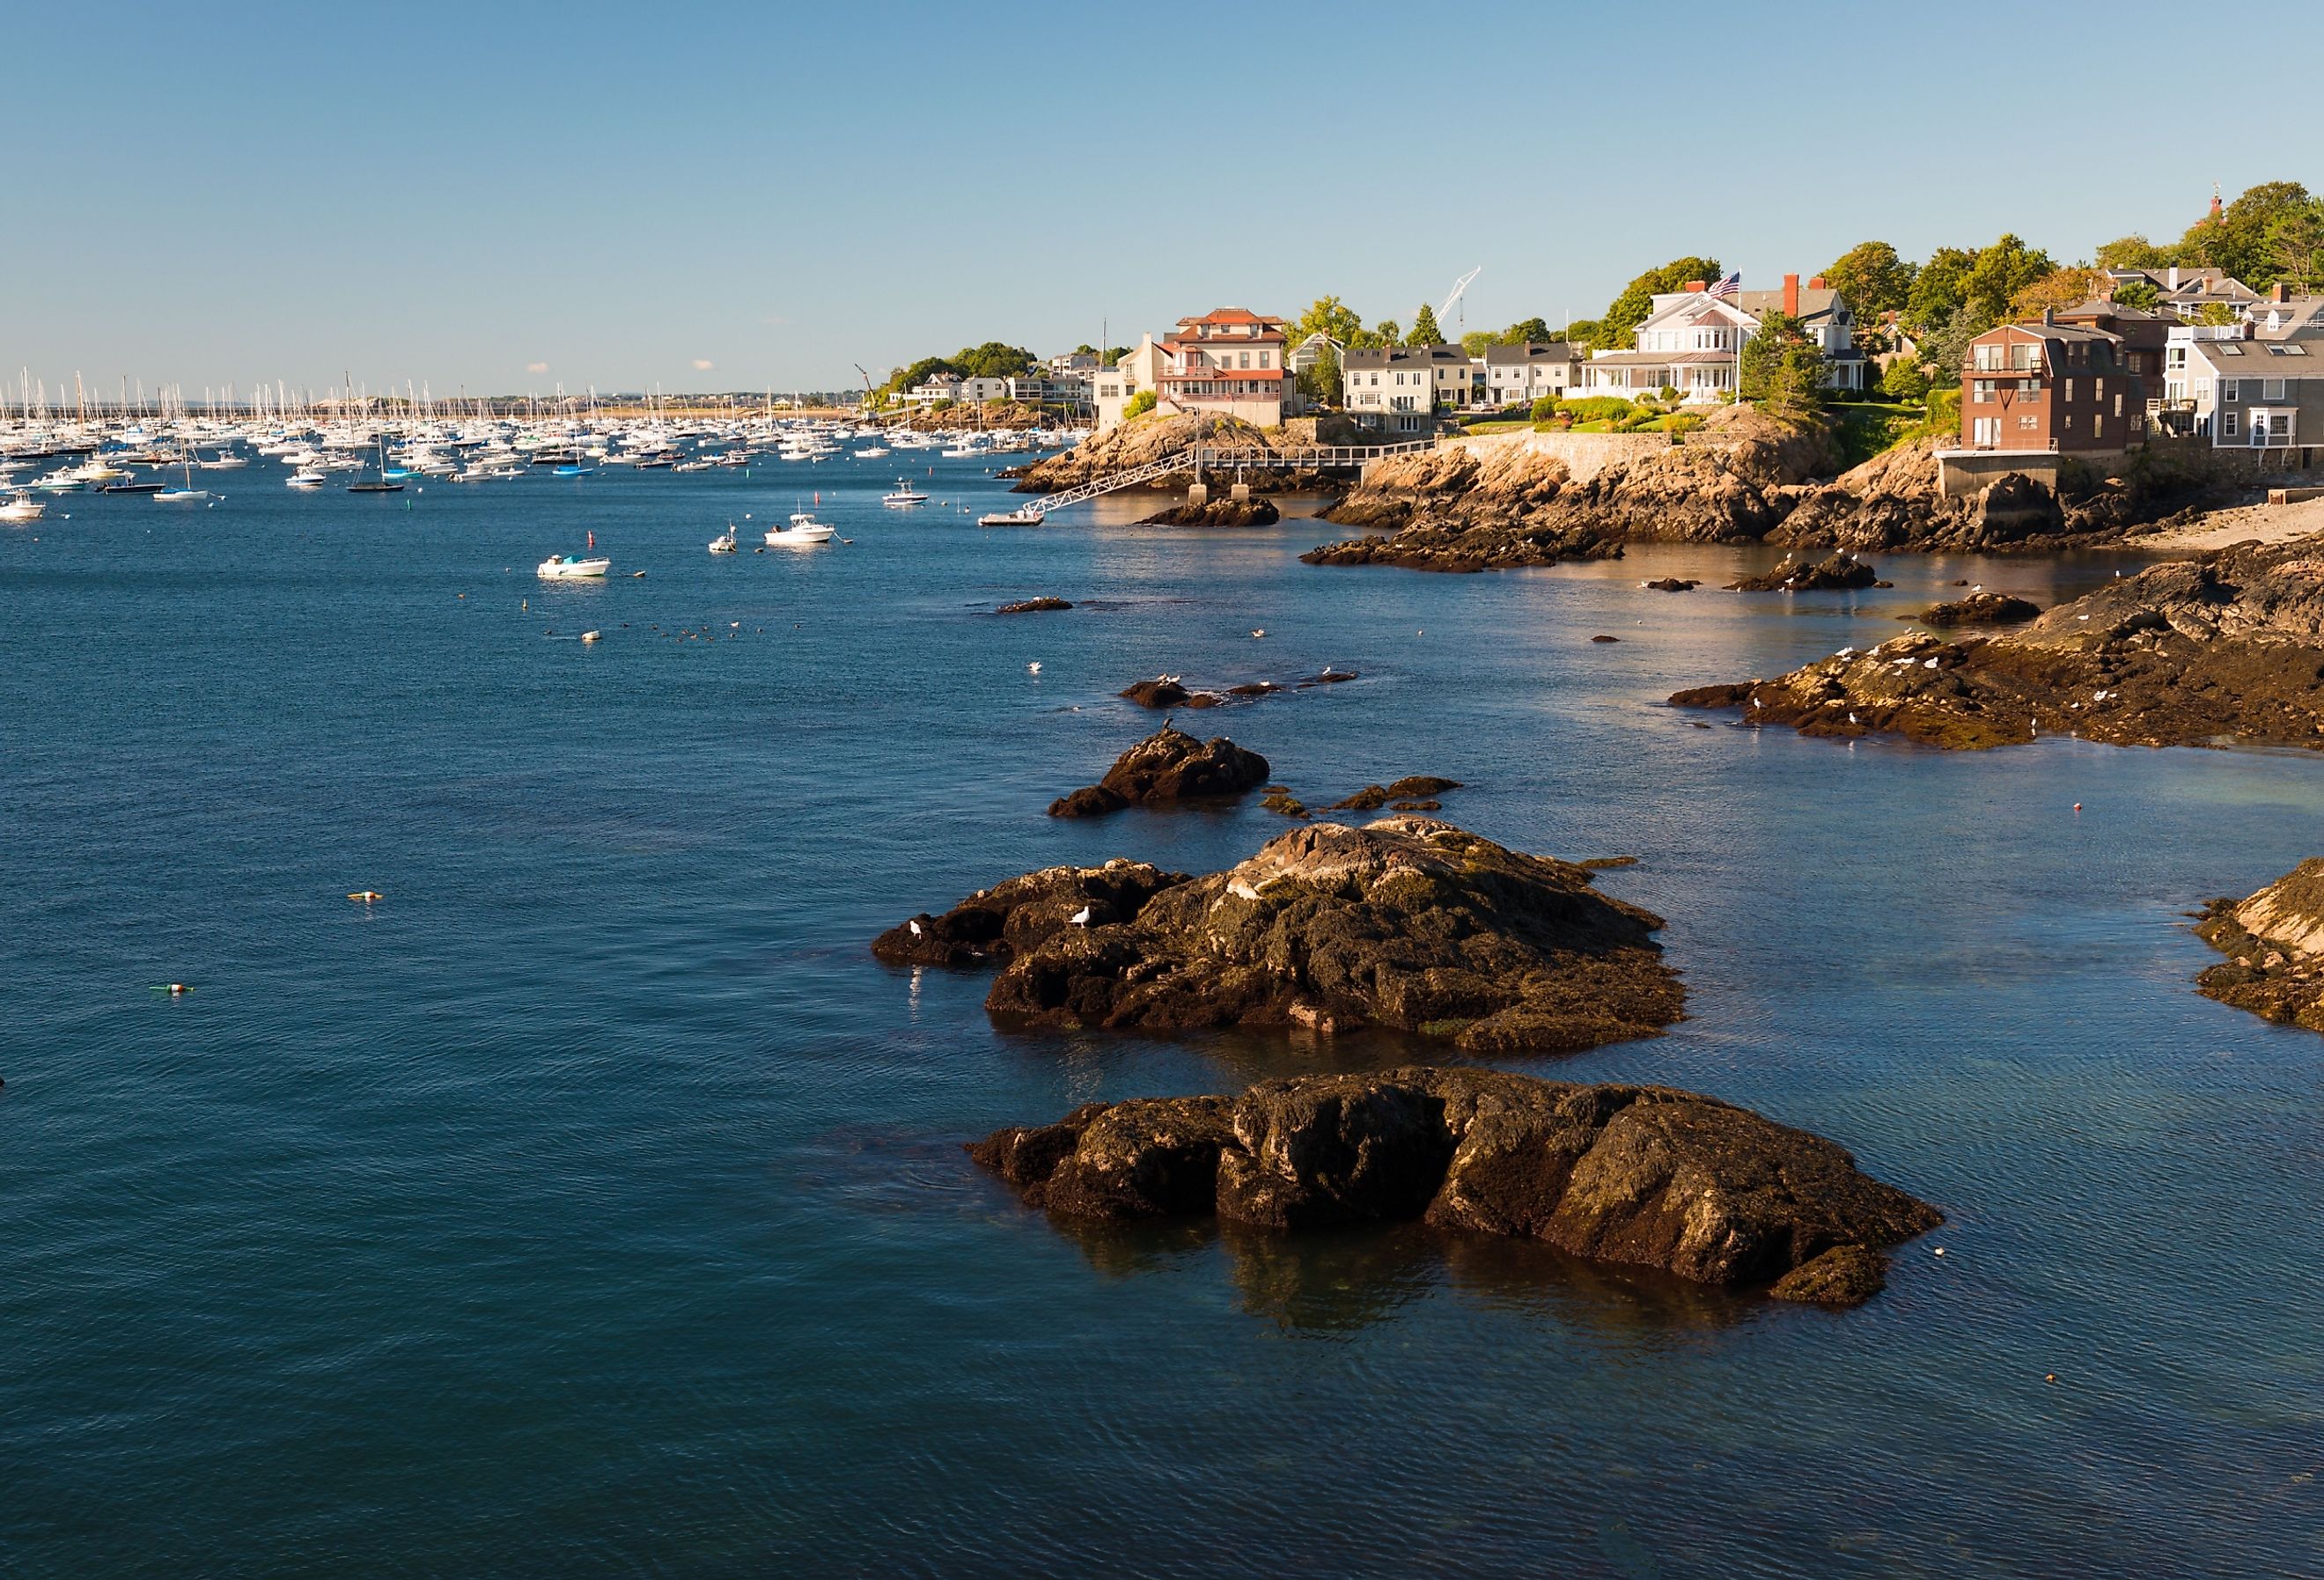 A scenic view of the beautiful town of Marblehead, MA, USA